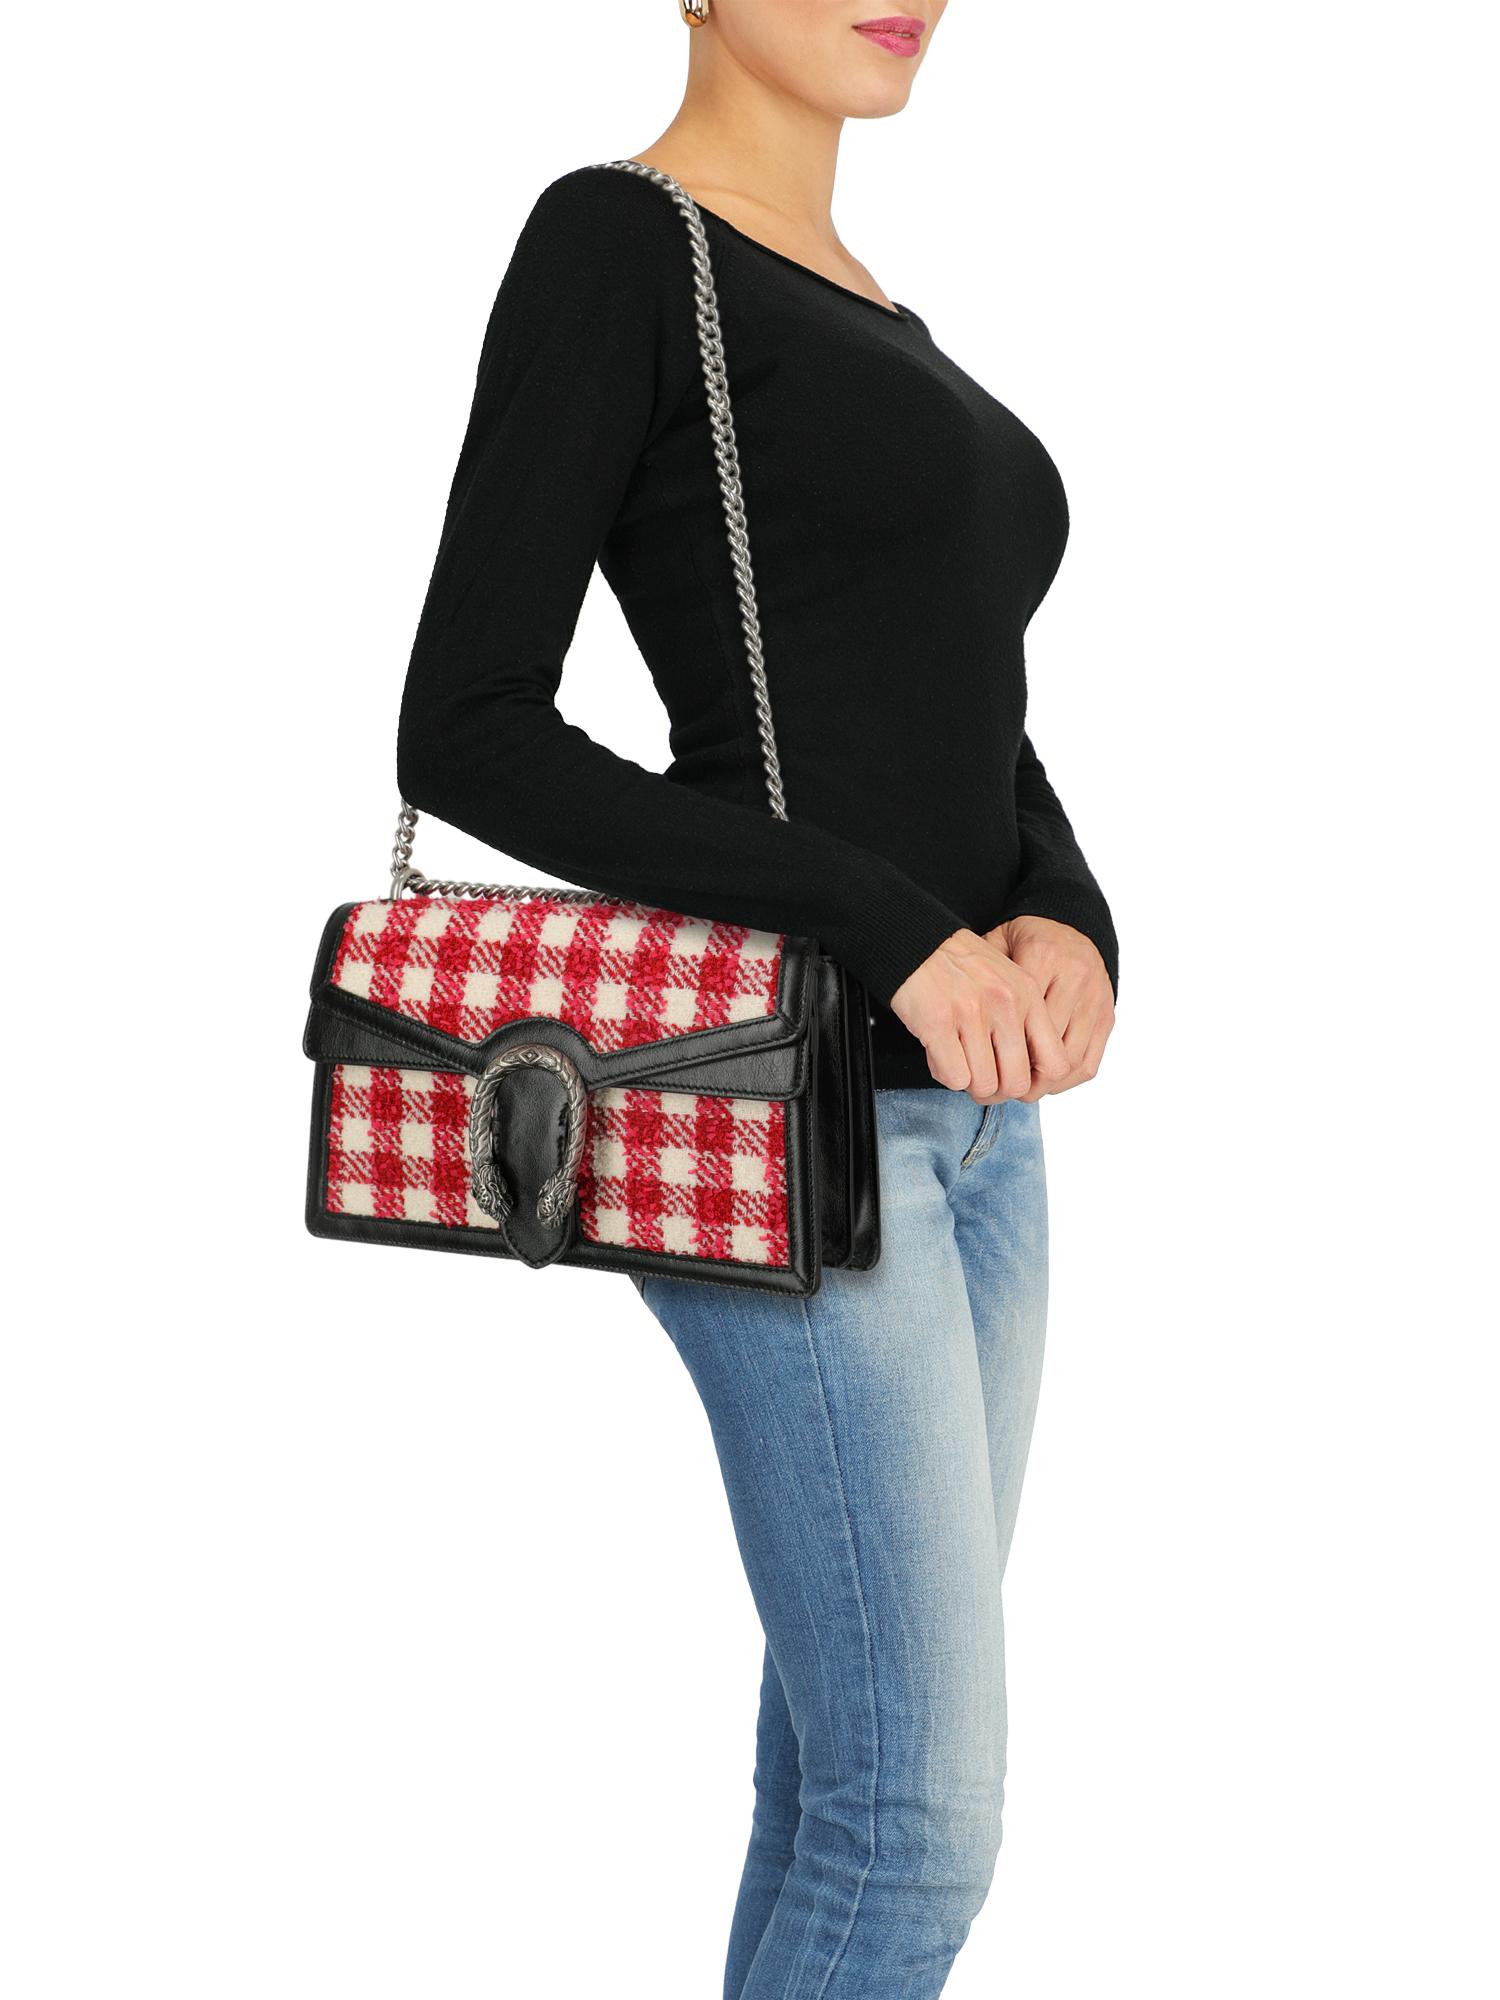 Product Description: Dionysus, fabric, gingham print, iconic detail, pressure lock closure, chain shoulder strap, silver-tone hardware, external pocket, internal zipped pocket, multiple internal compartments, suede lining, leather trim.

Includes: